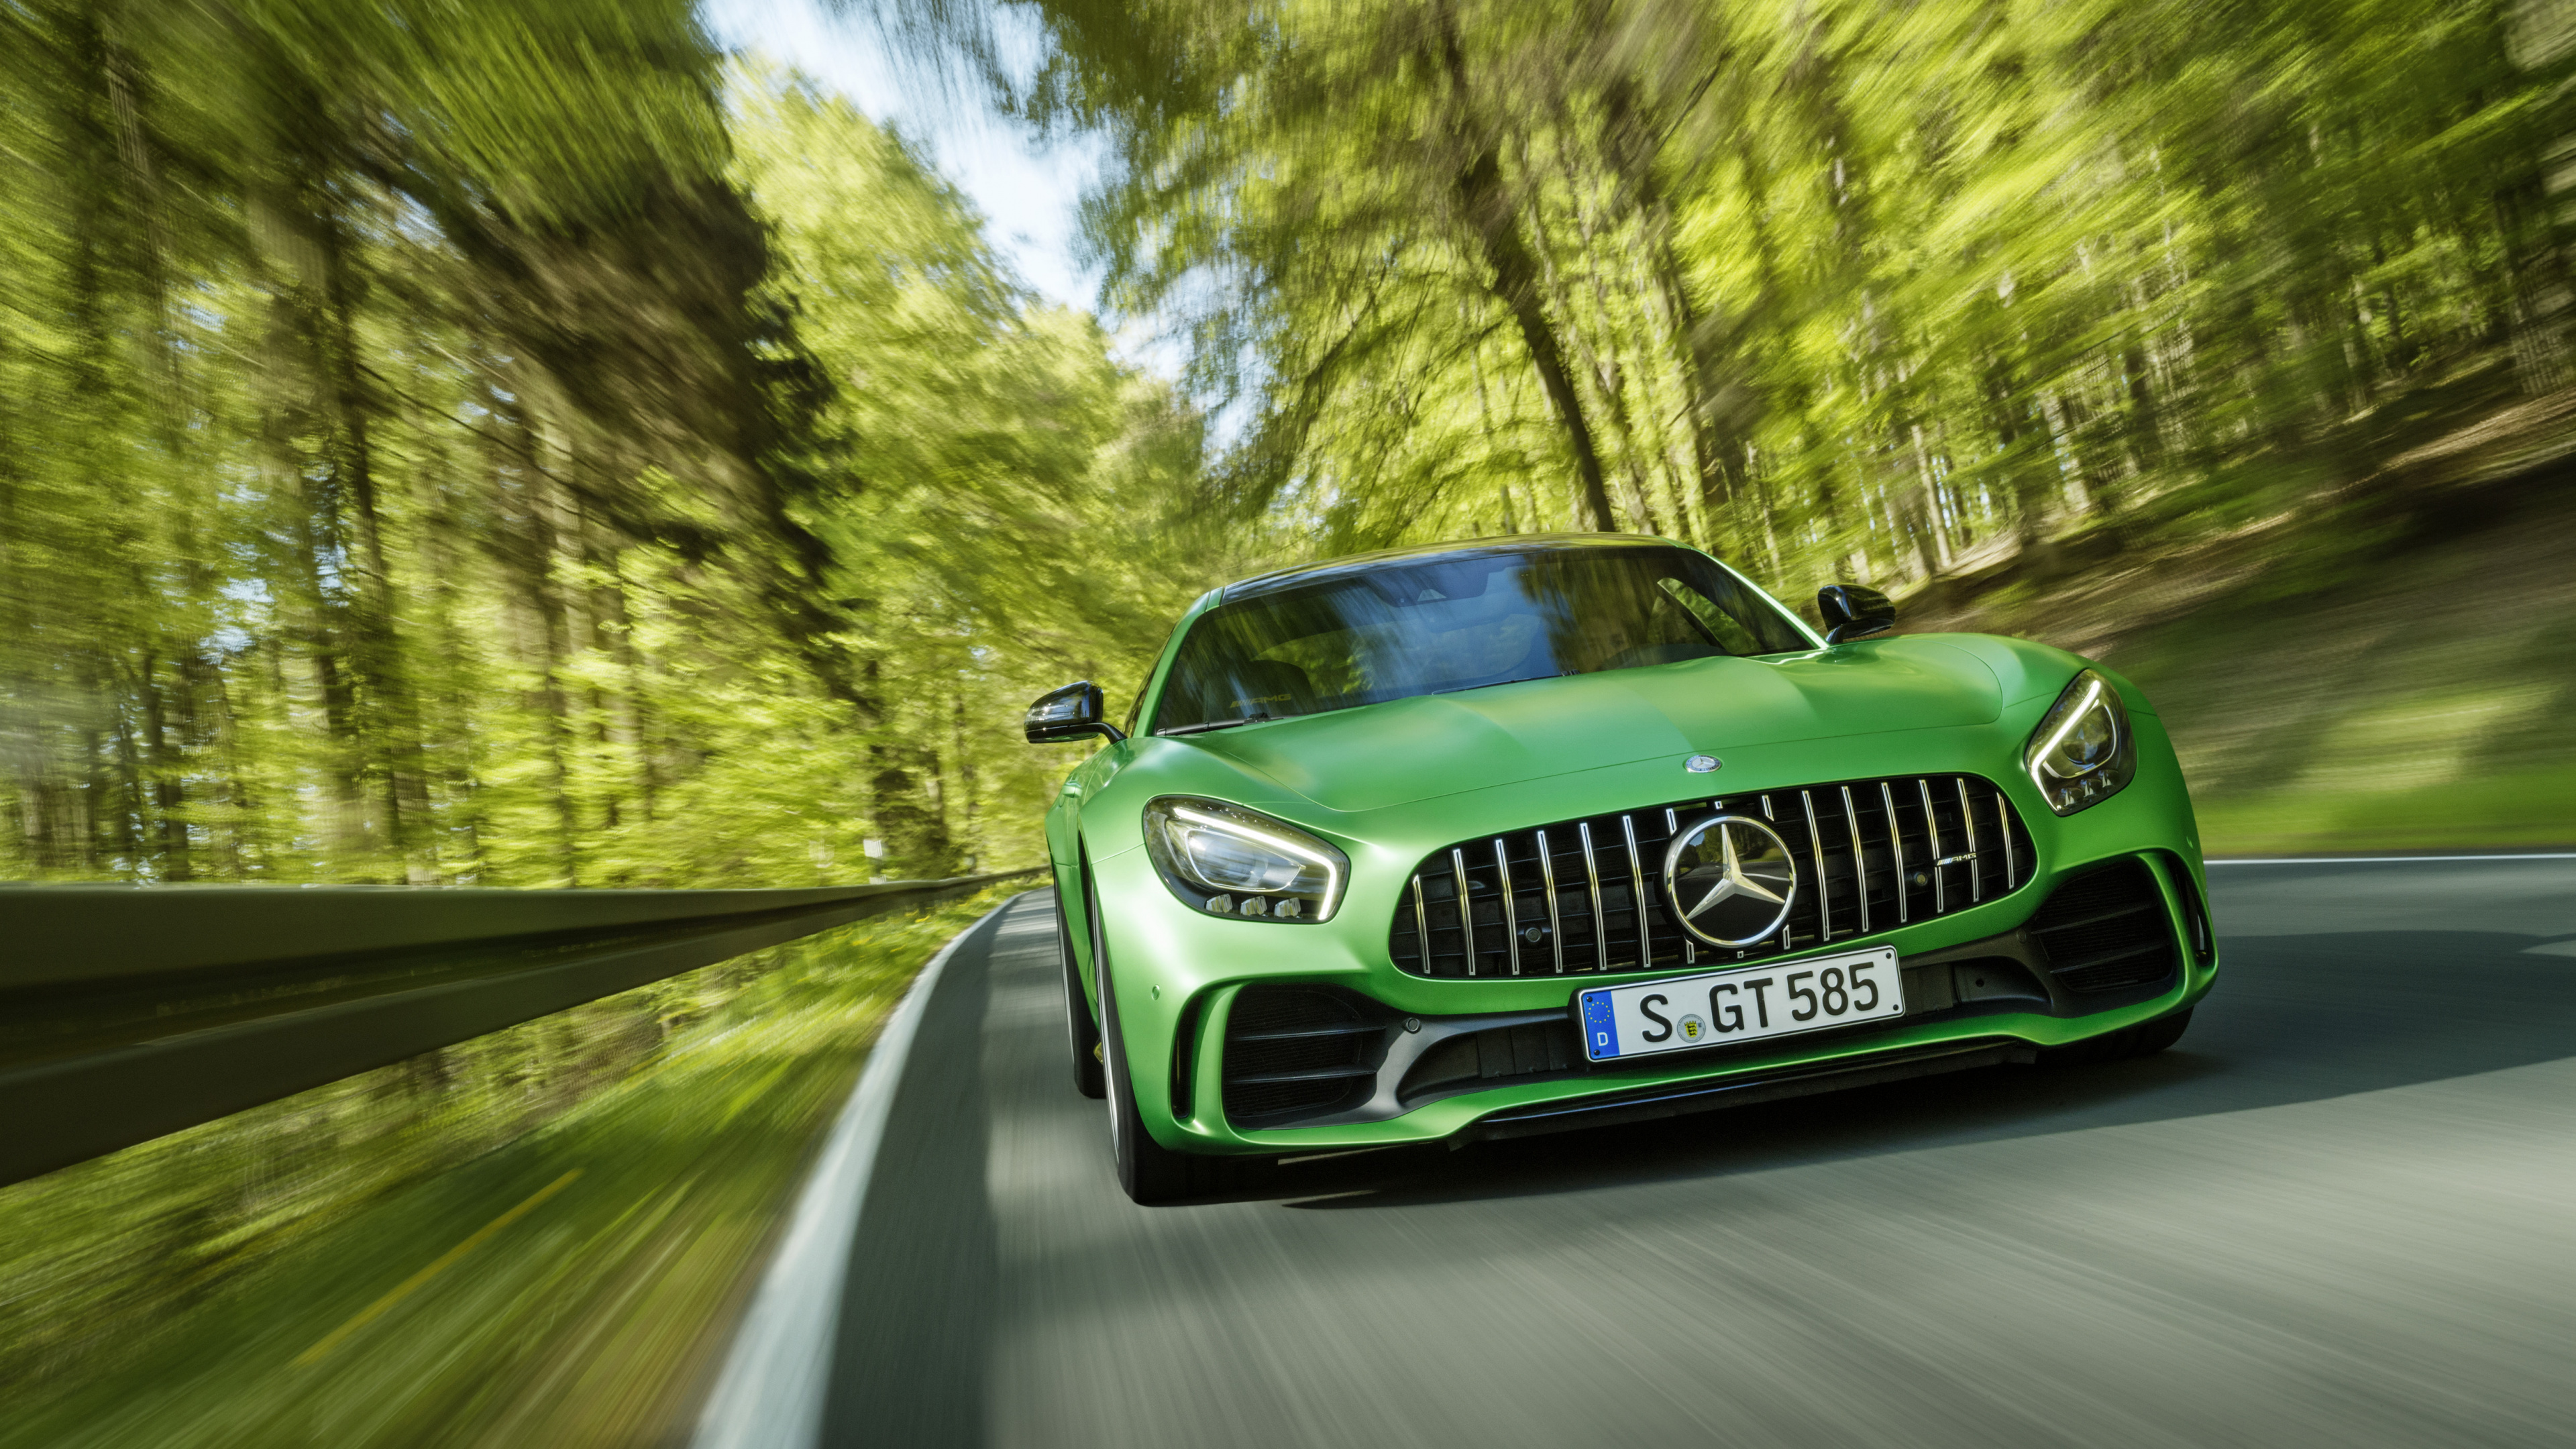 Green Mercedes Benz Car on Road During Daytime. Wallpaper in 3840x2160 Resolution